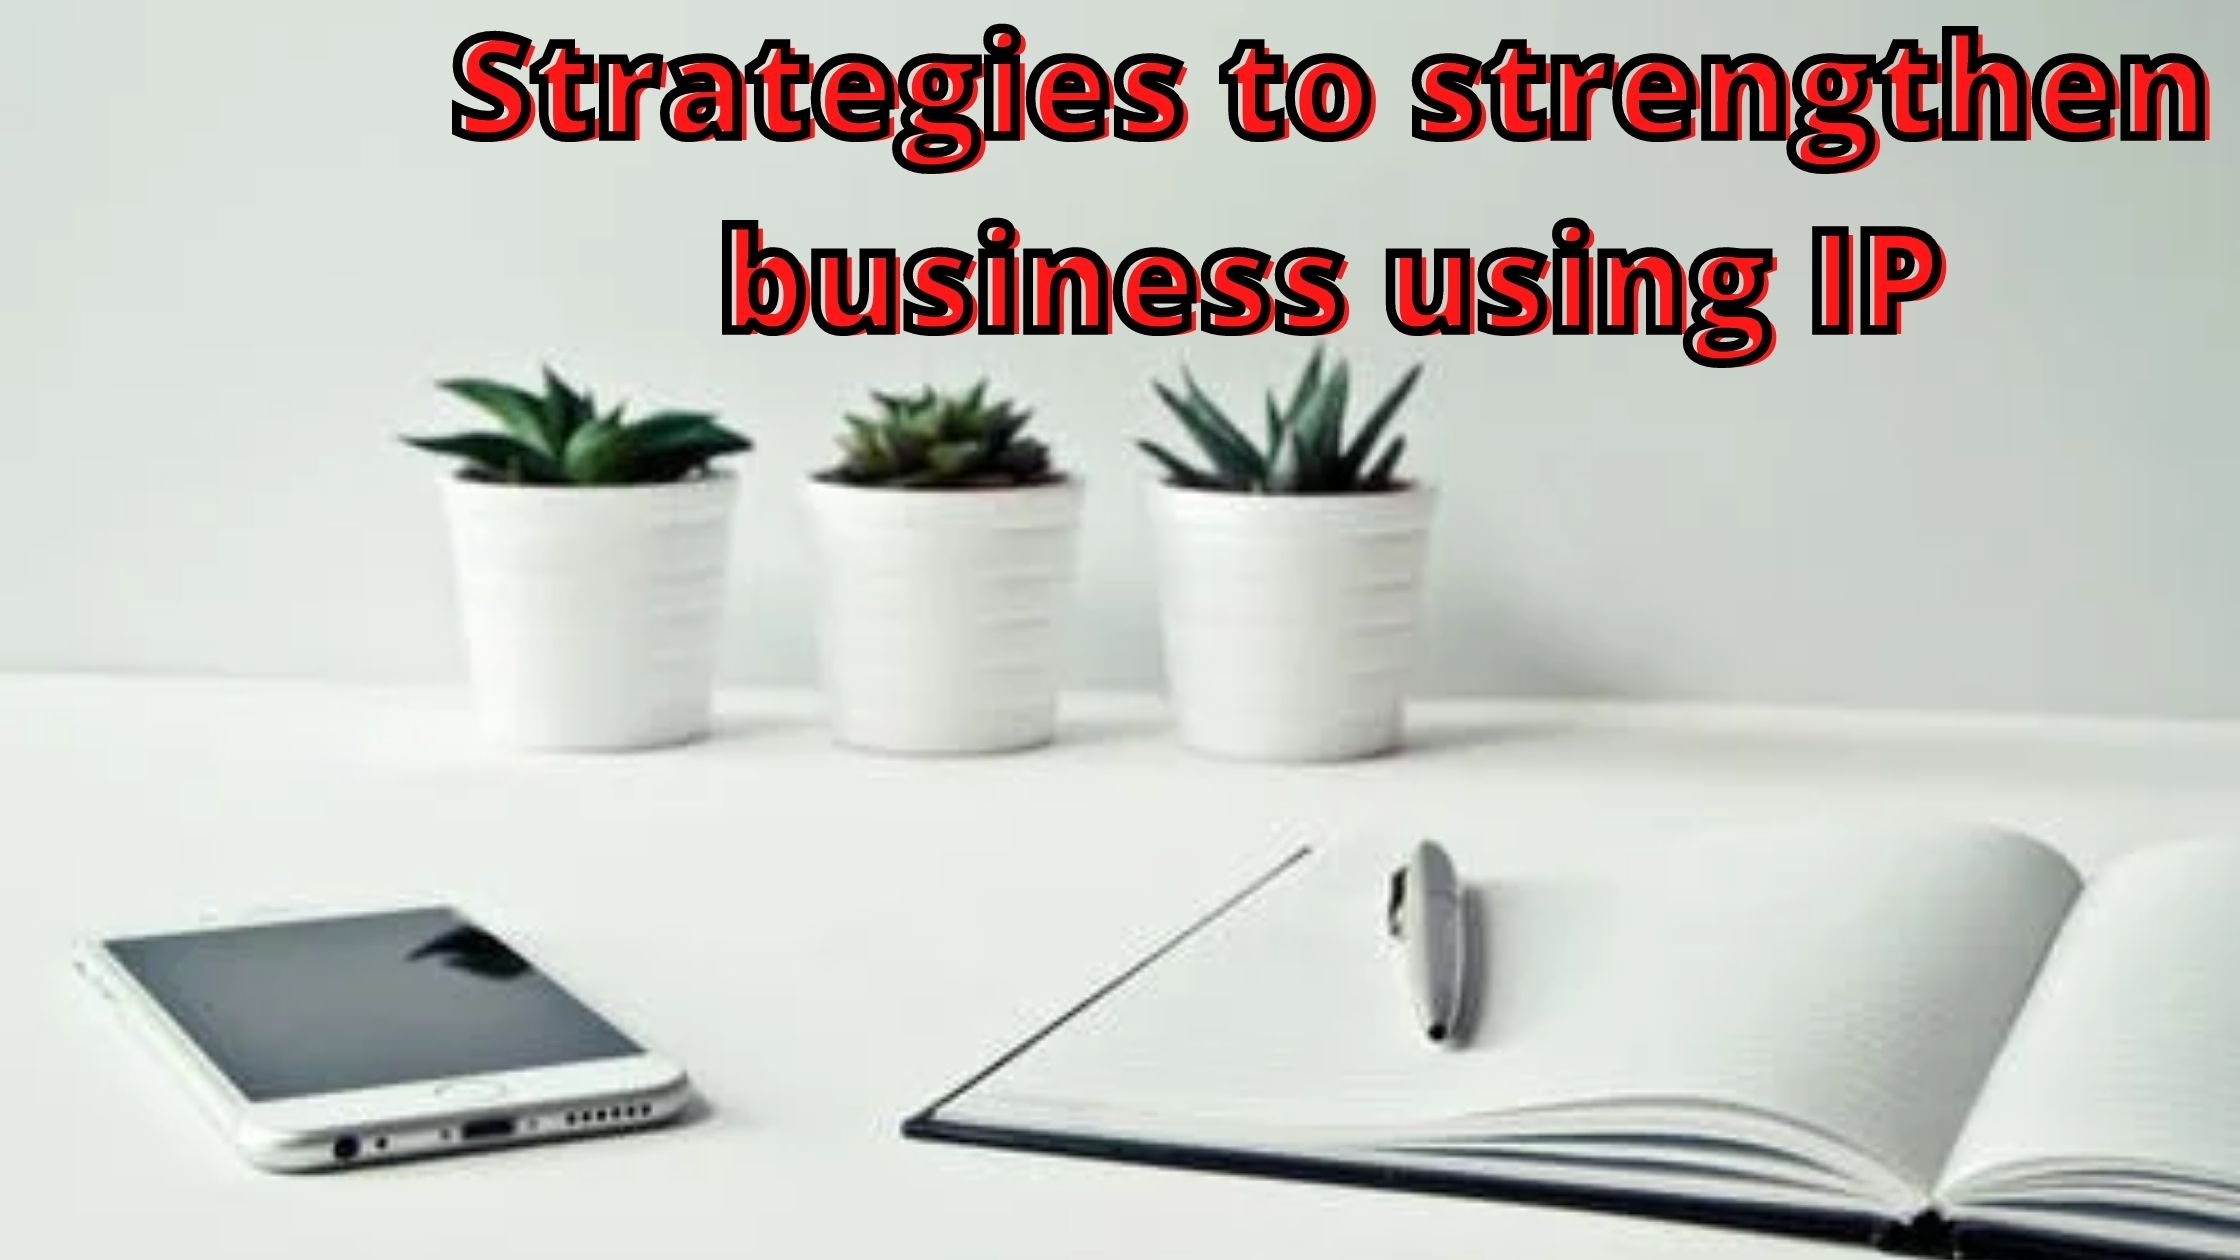 Strategies to Strengthen Business using Intellectual Property